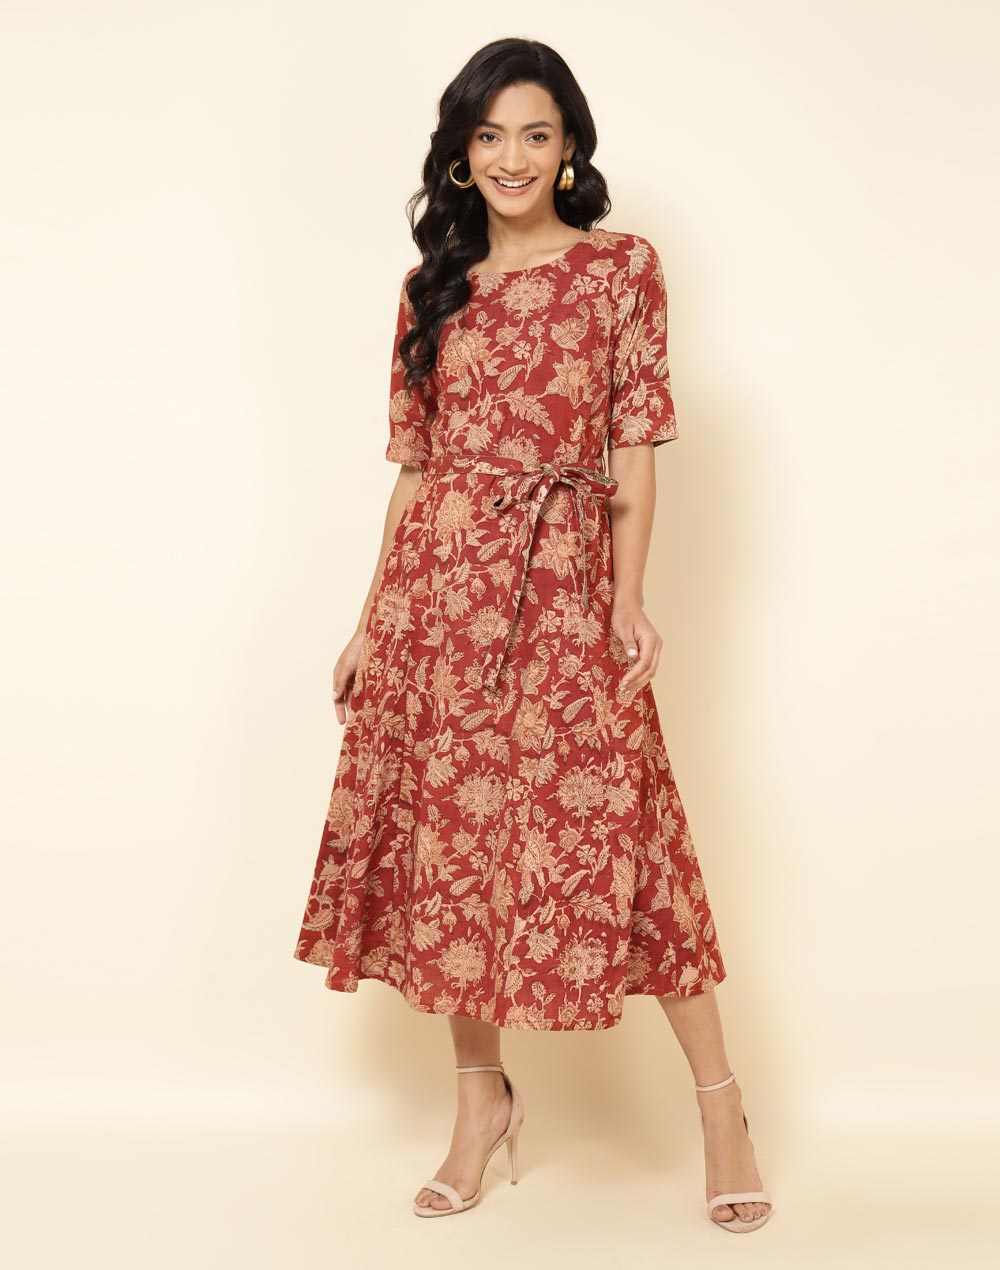 Buy Western Wear for Women, Western Outfit for Women at Fabindia